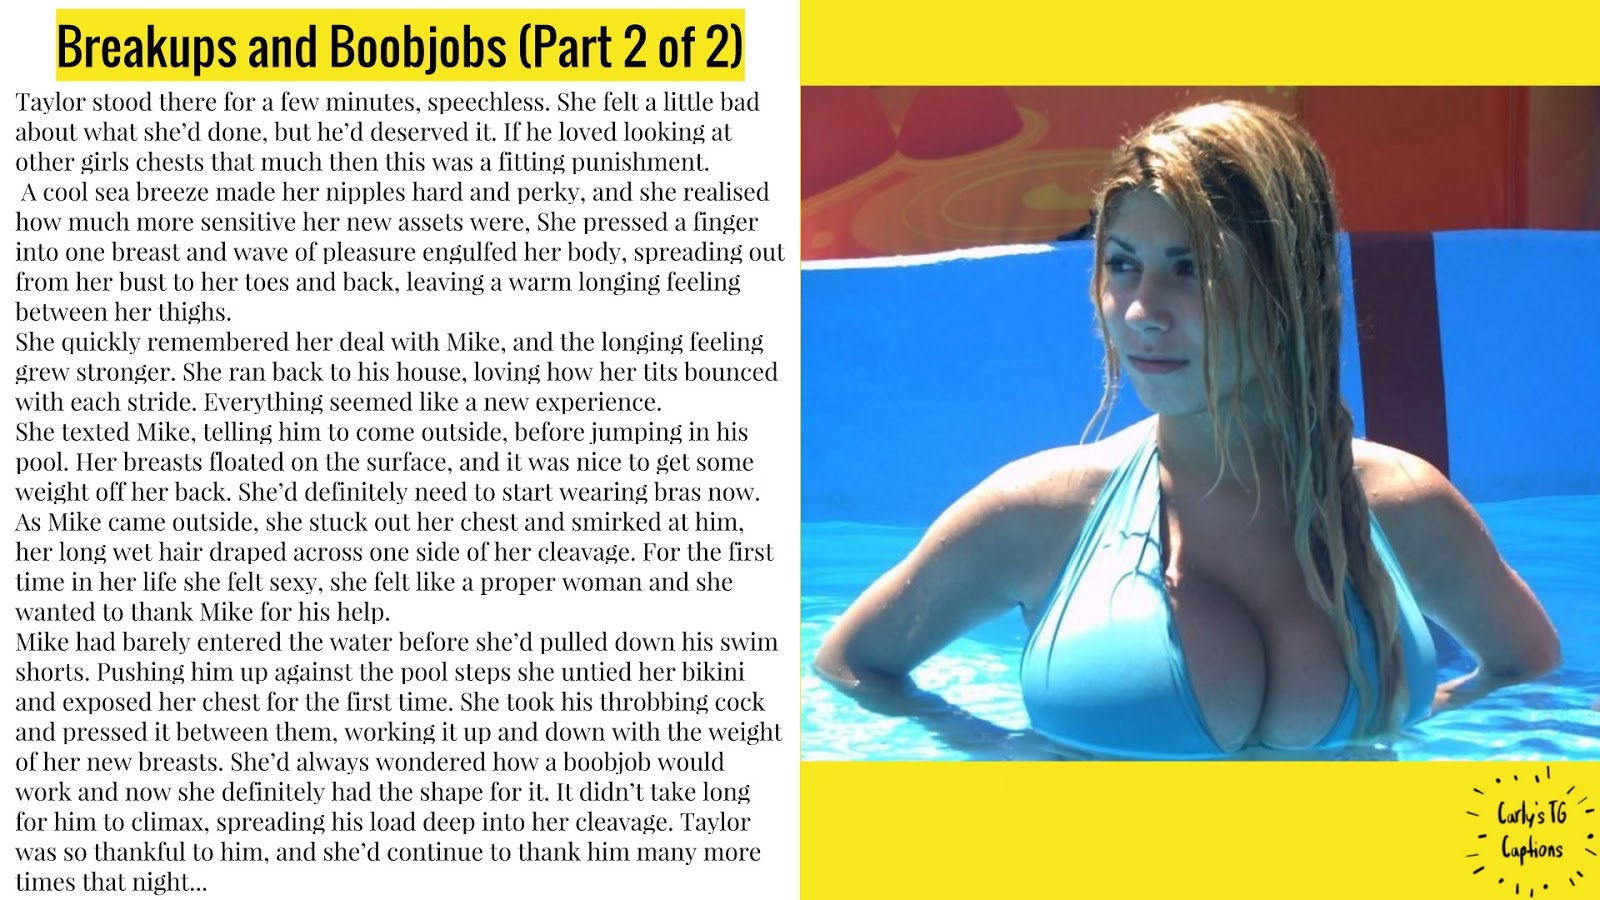 Breakups and Boobjobs (2-Part Caption) .